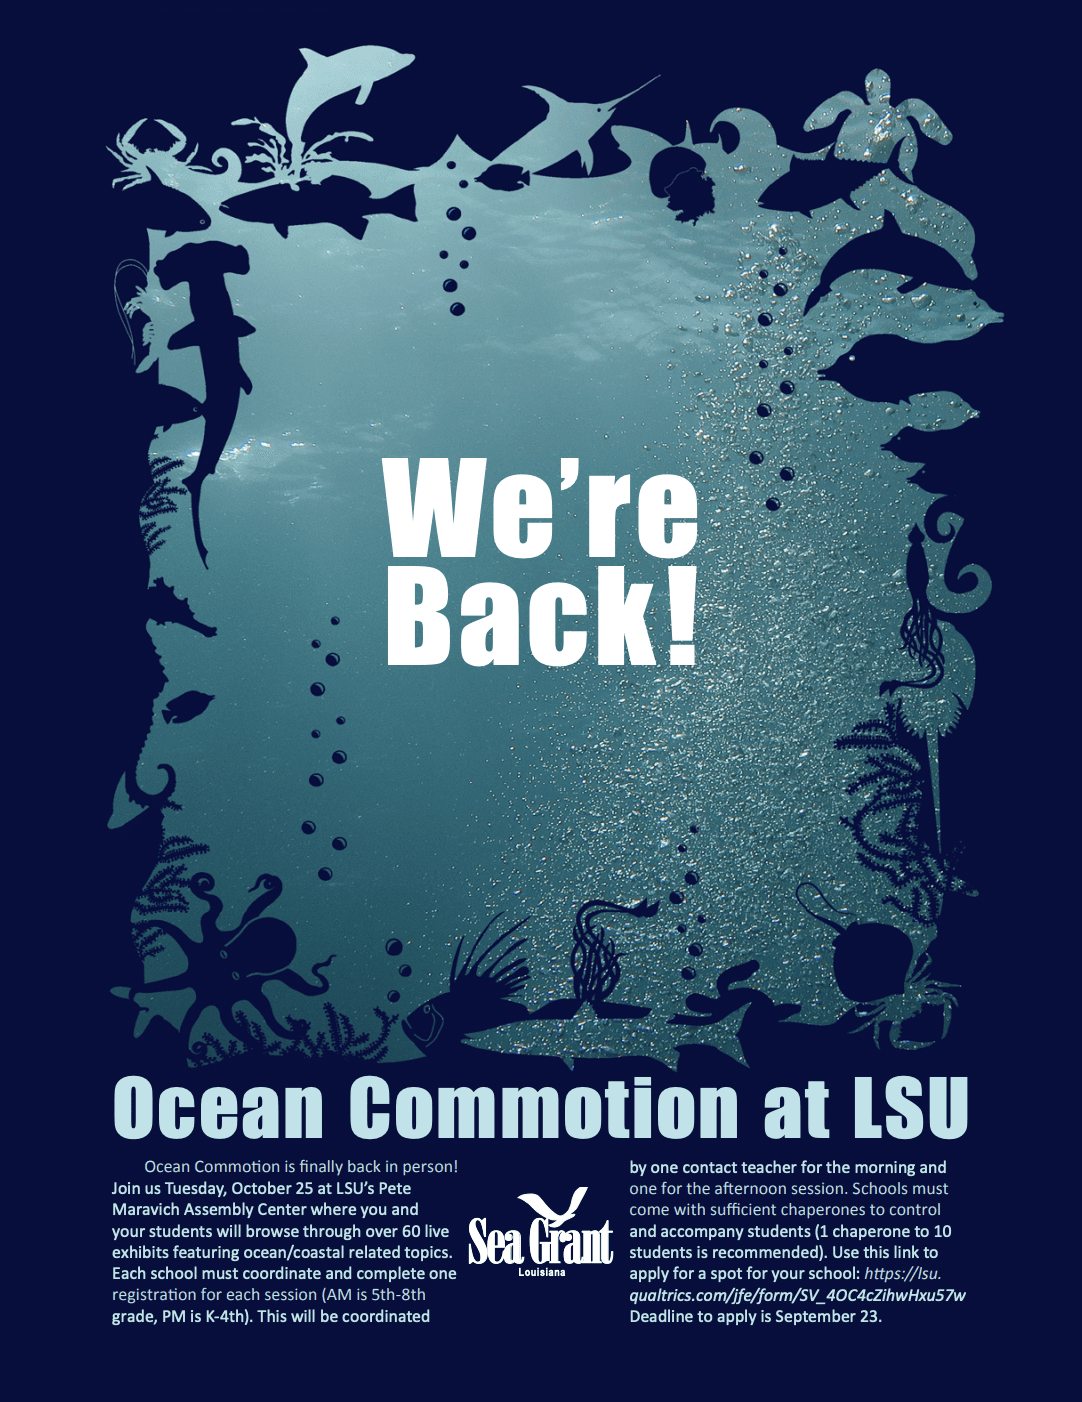 25th Annual Ocean Commotion at LSU